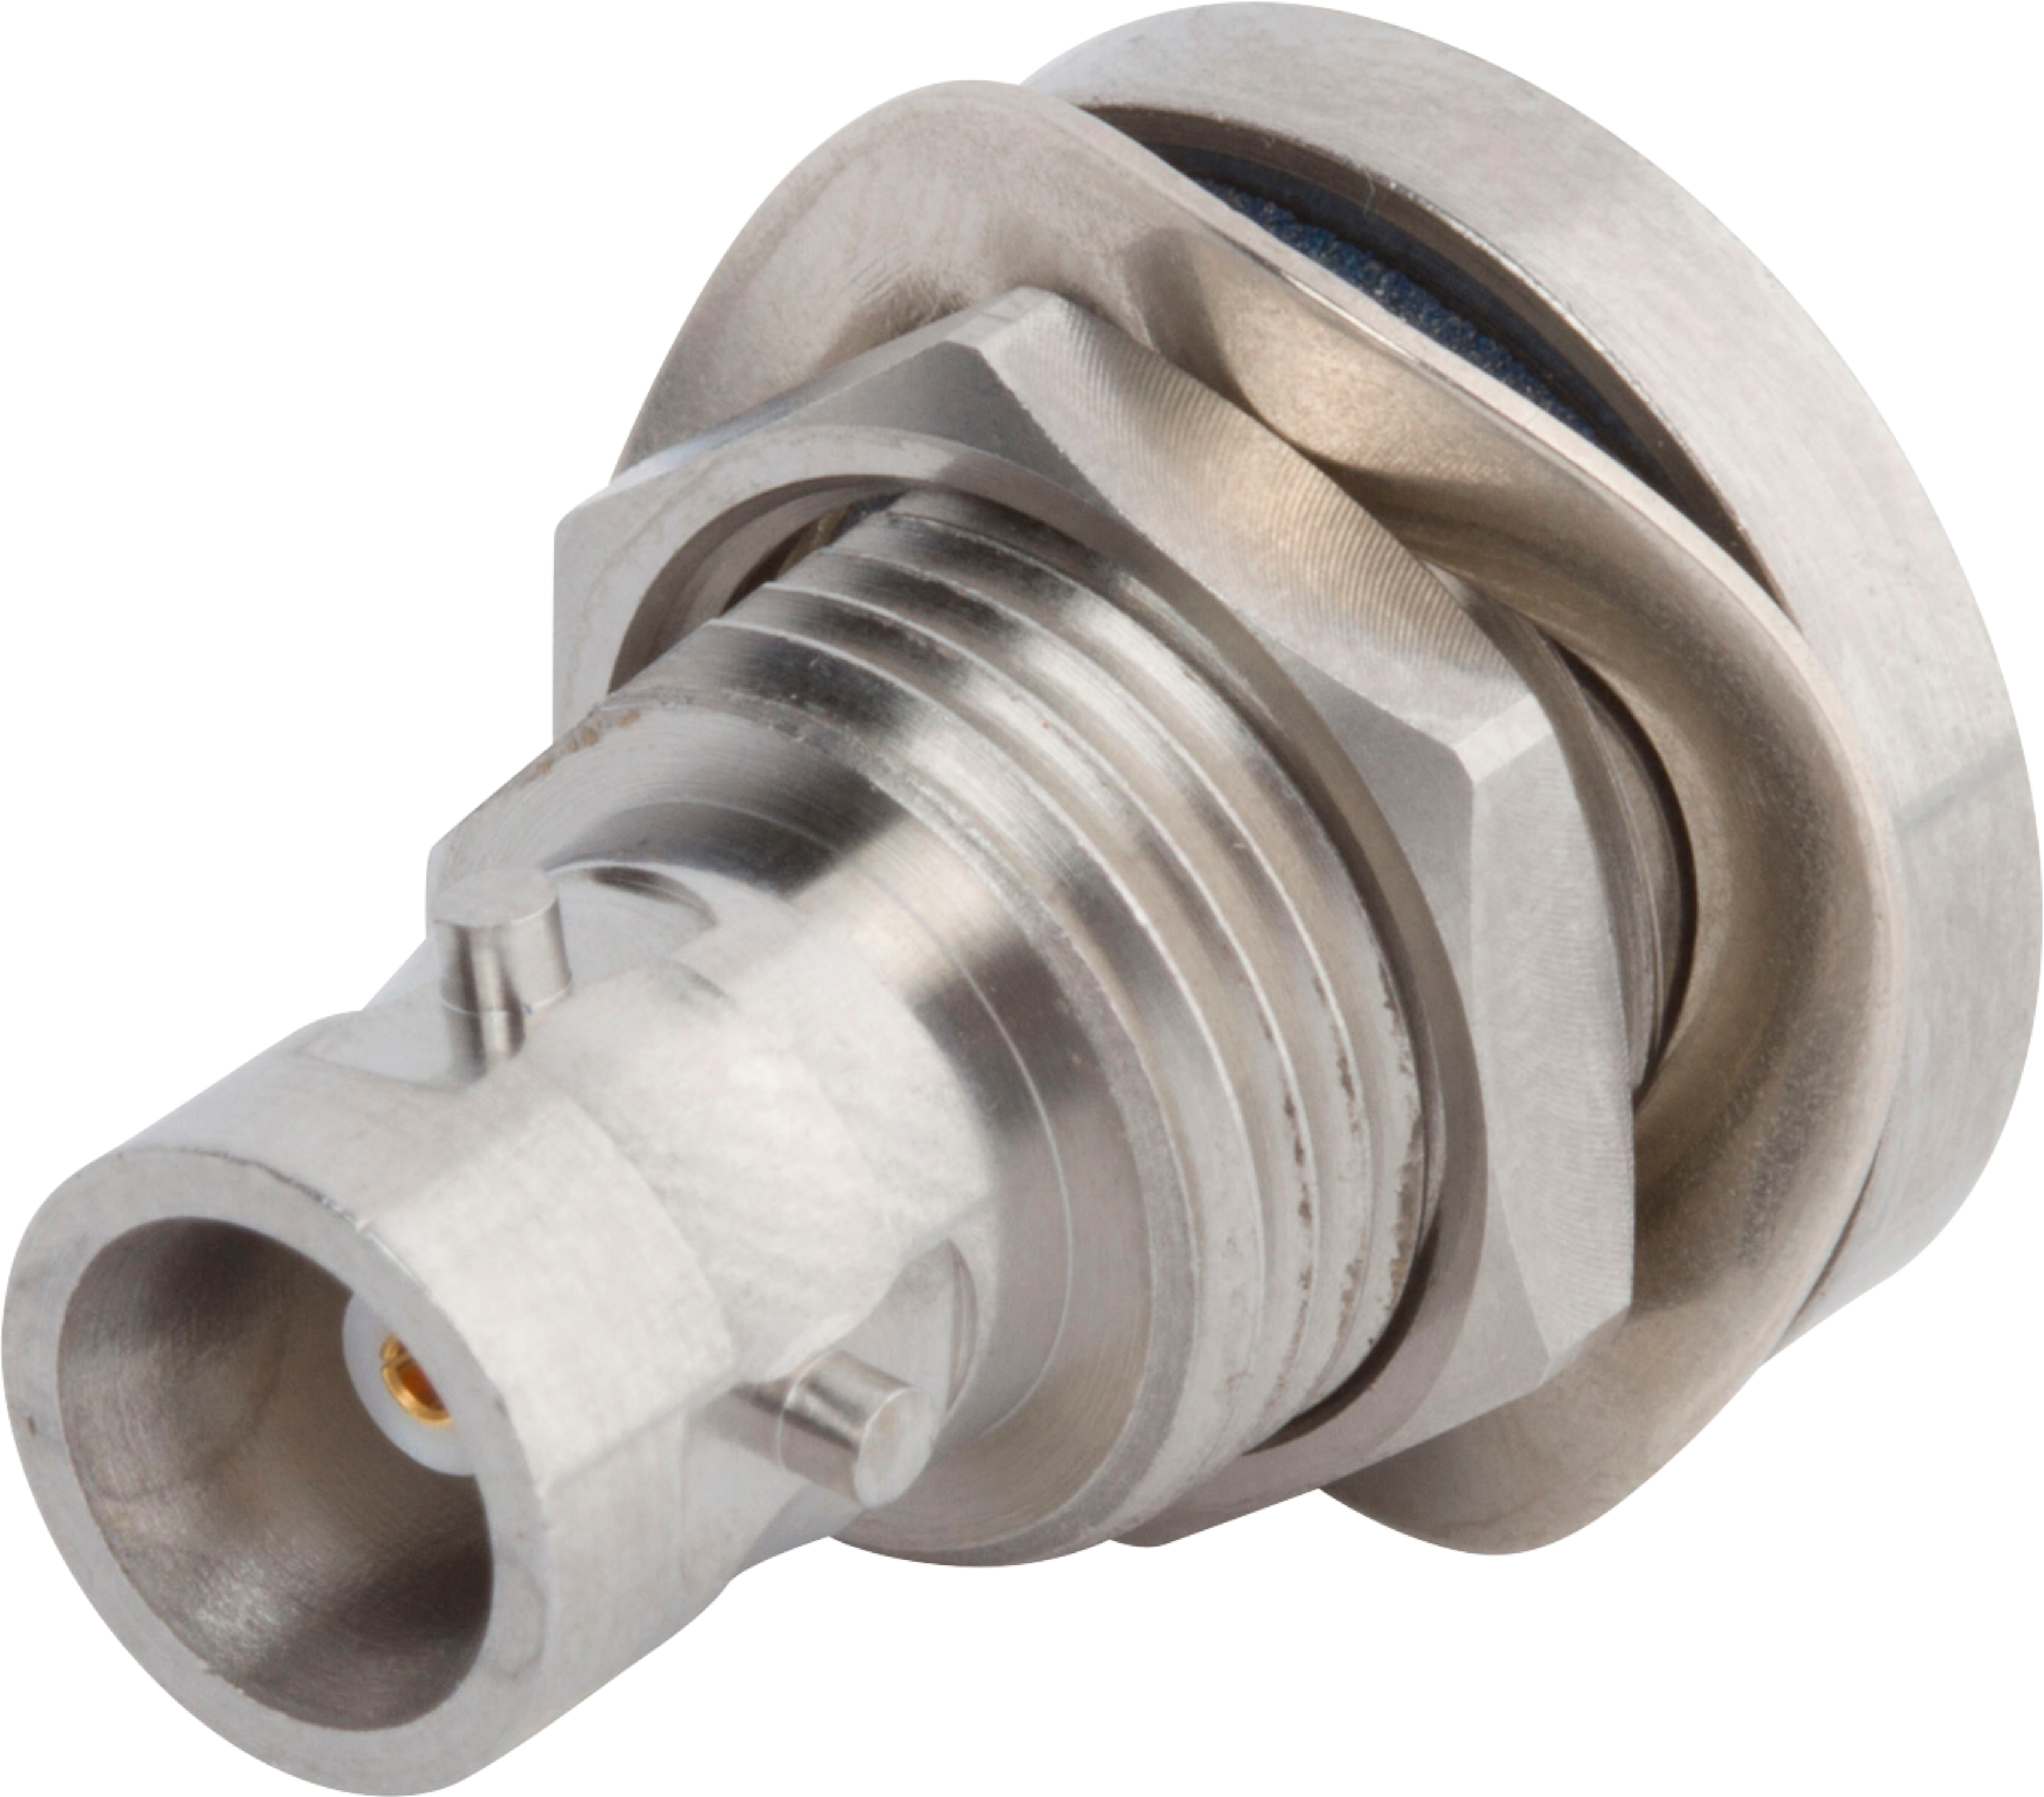 ZMA Female (130°|100°|130°) Connector for .085 Cable, SF8721-60110